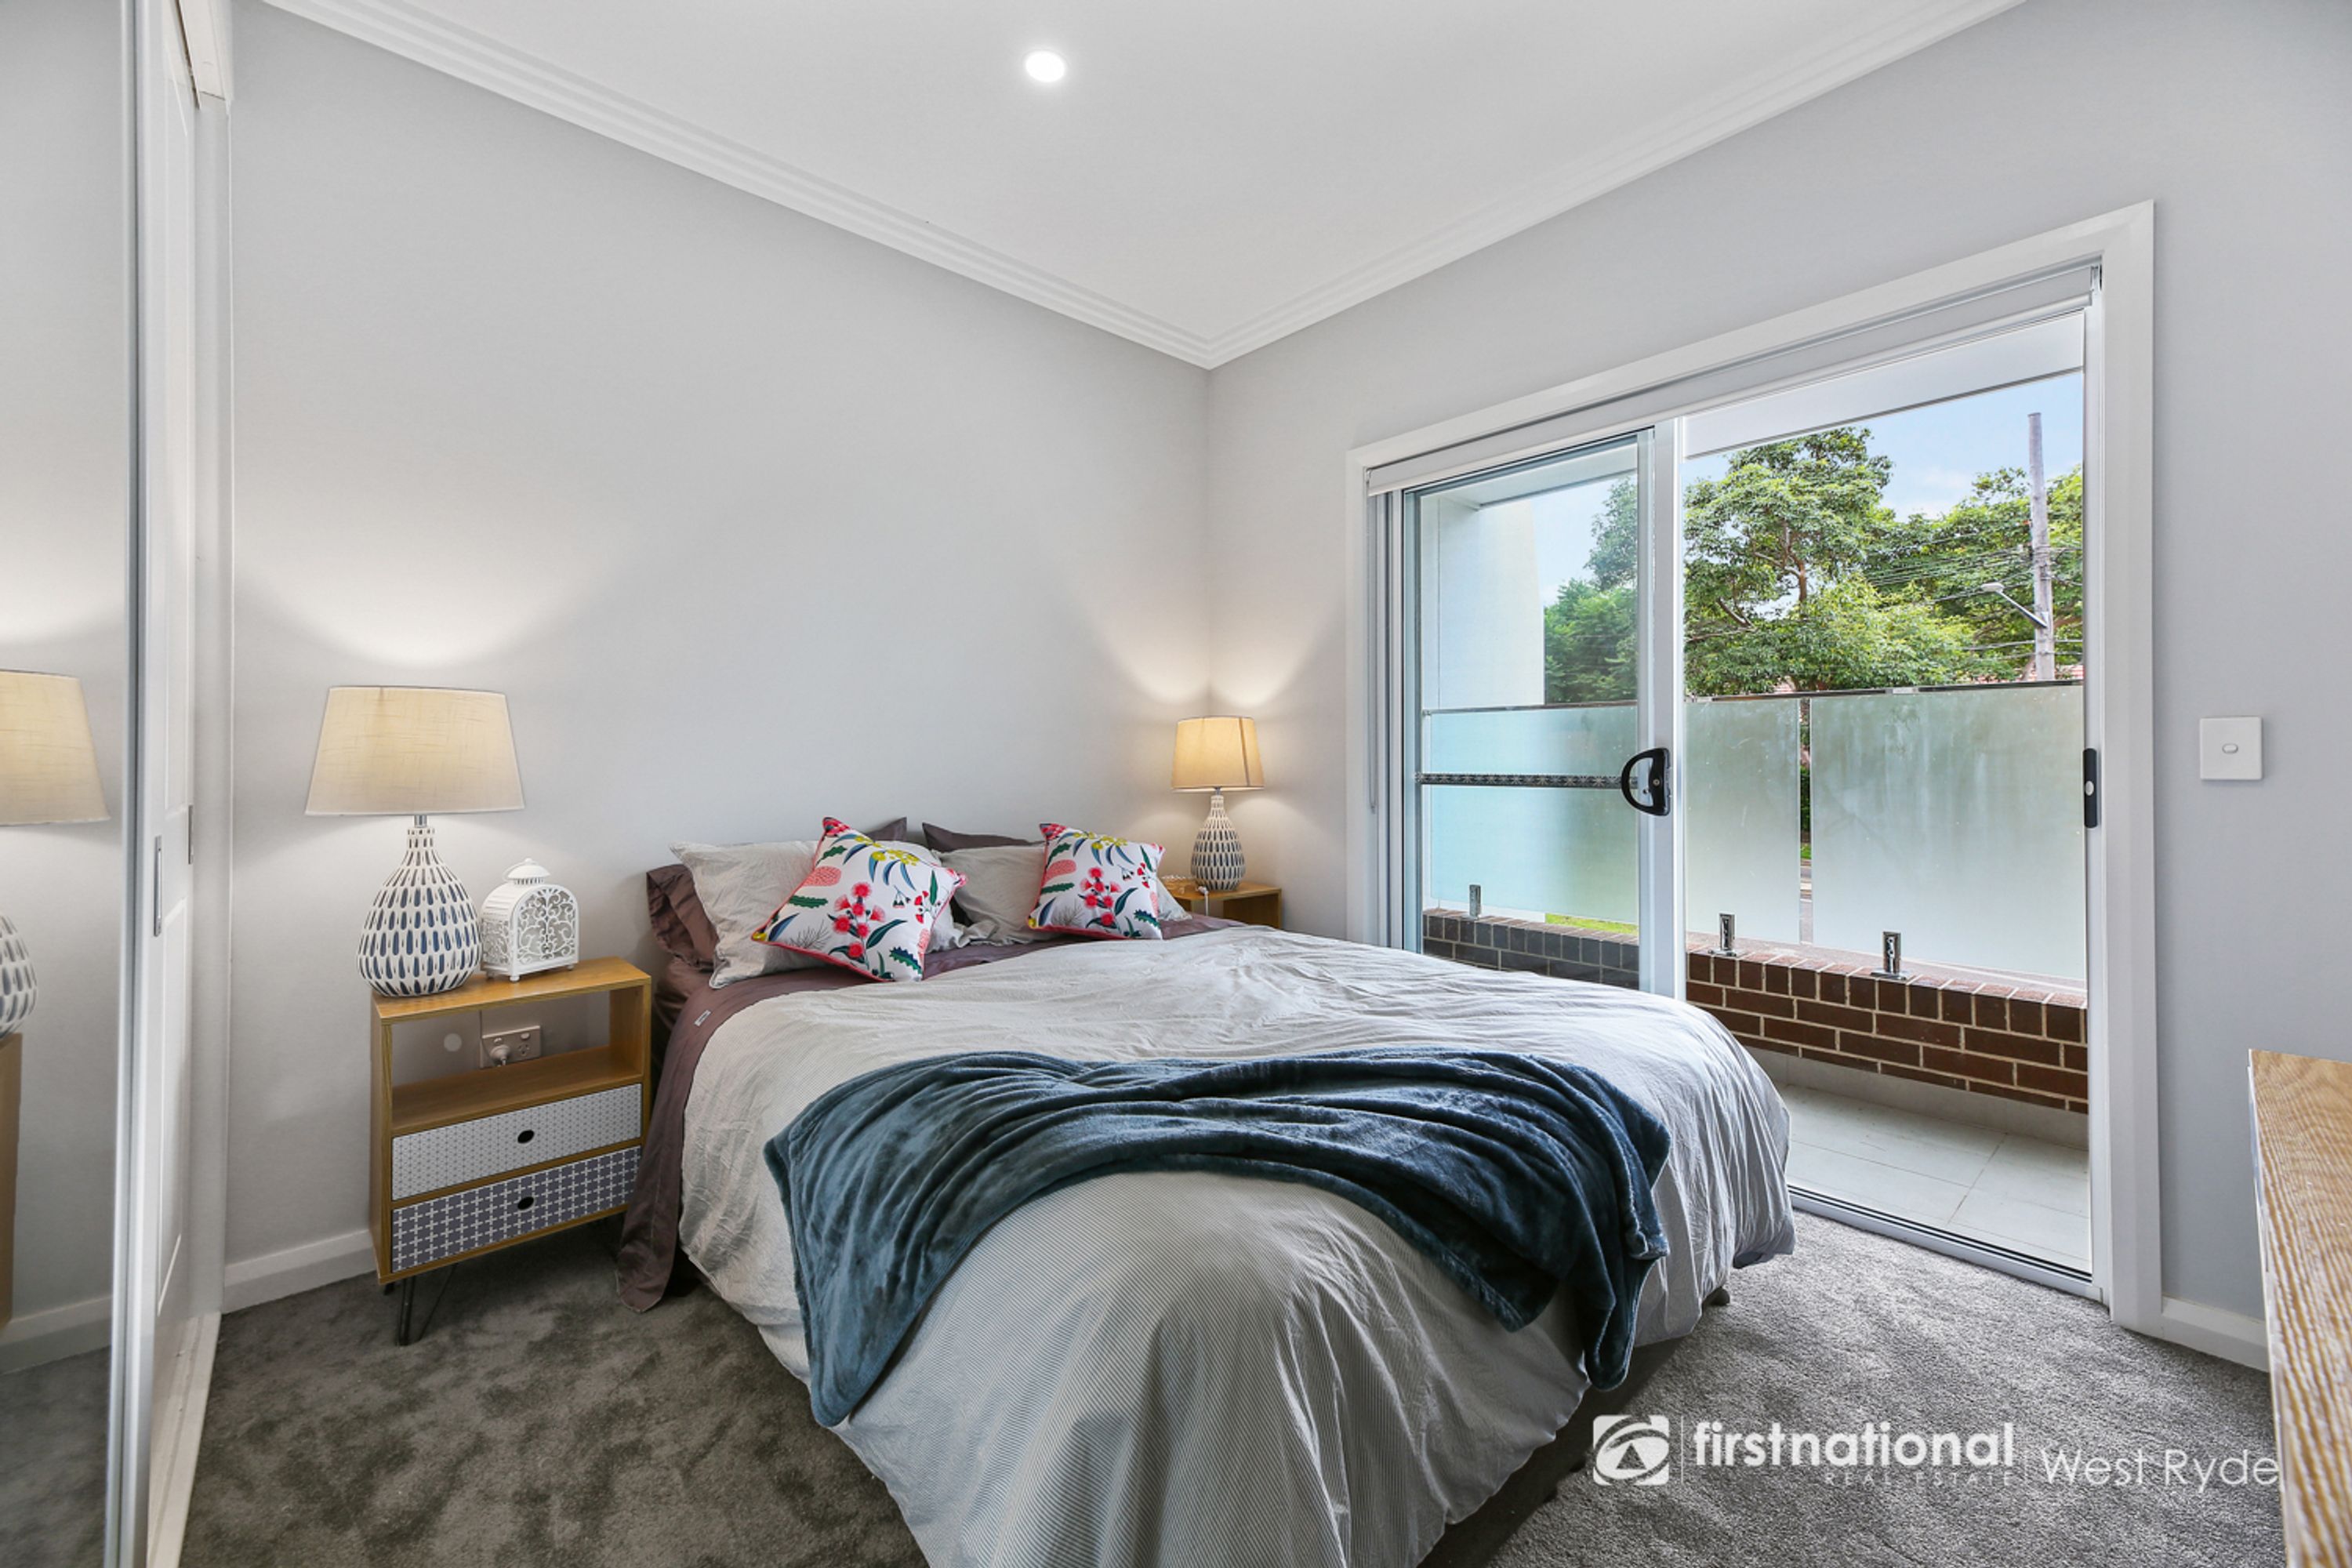 16 Anthony Road, West Ryde, NSW 2114